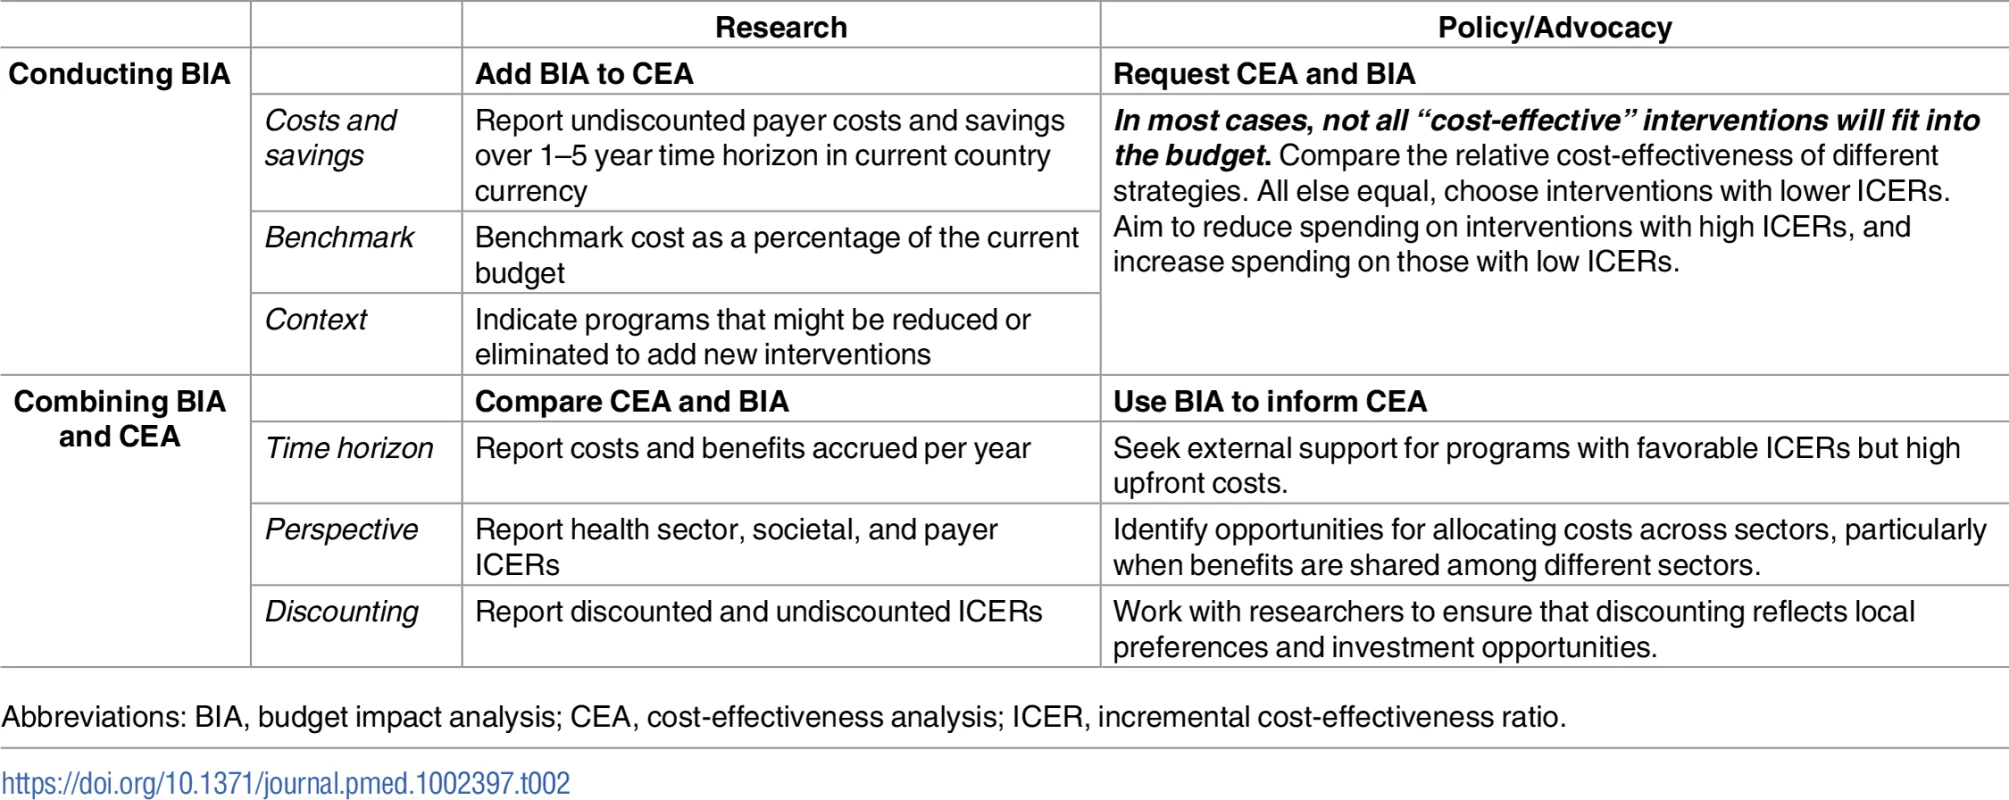 Research and policy/advocacy recommendations for CEA and BIA.